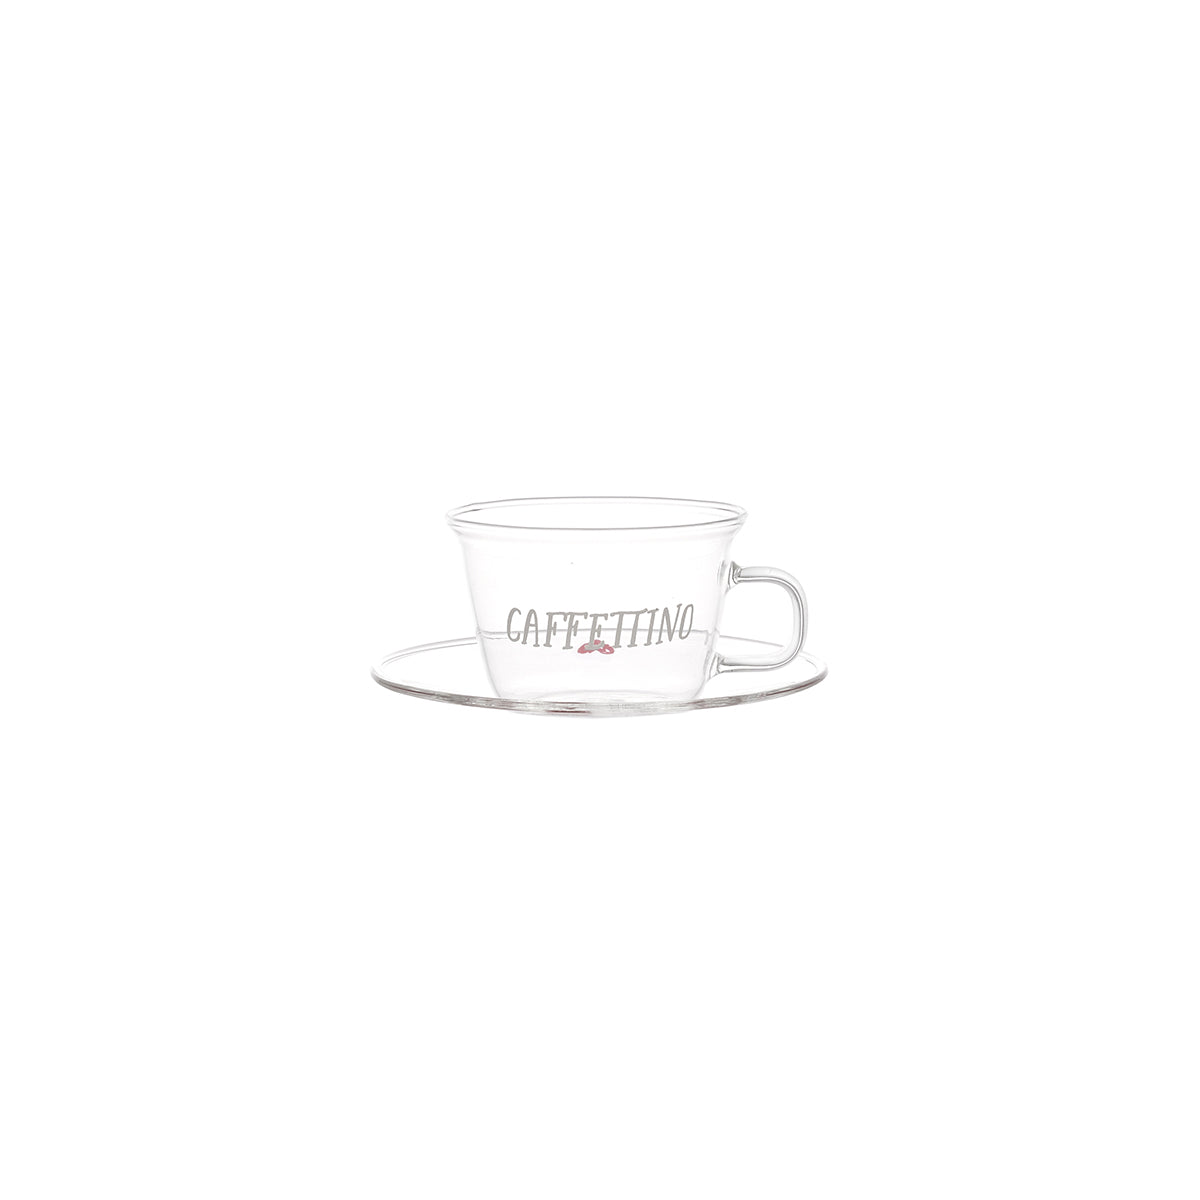 Caffettino red hearts 2 espresso cup and saucer set